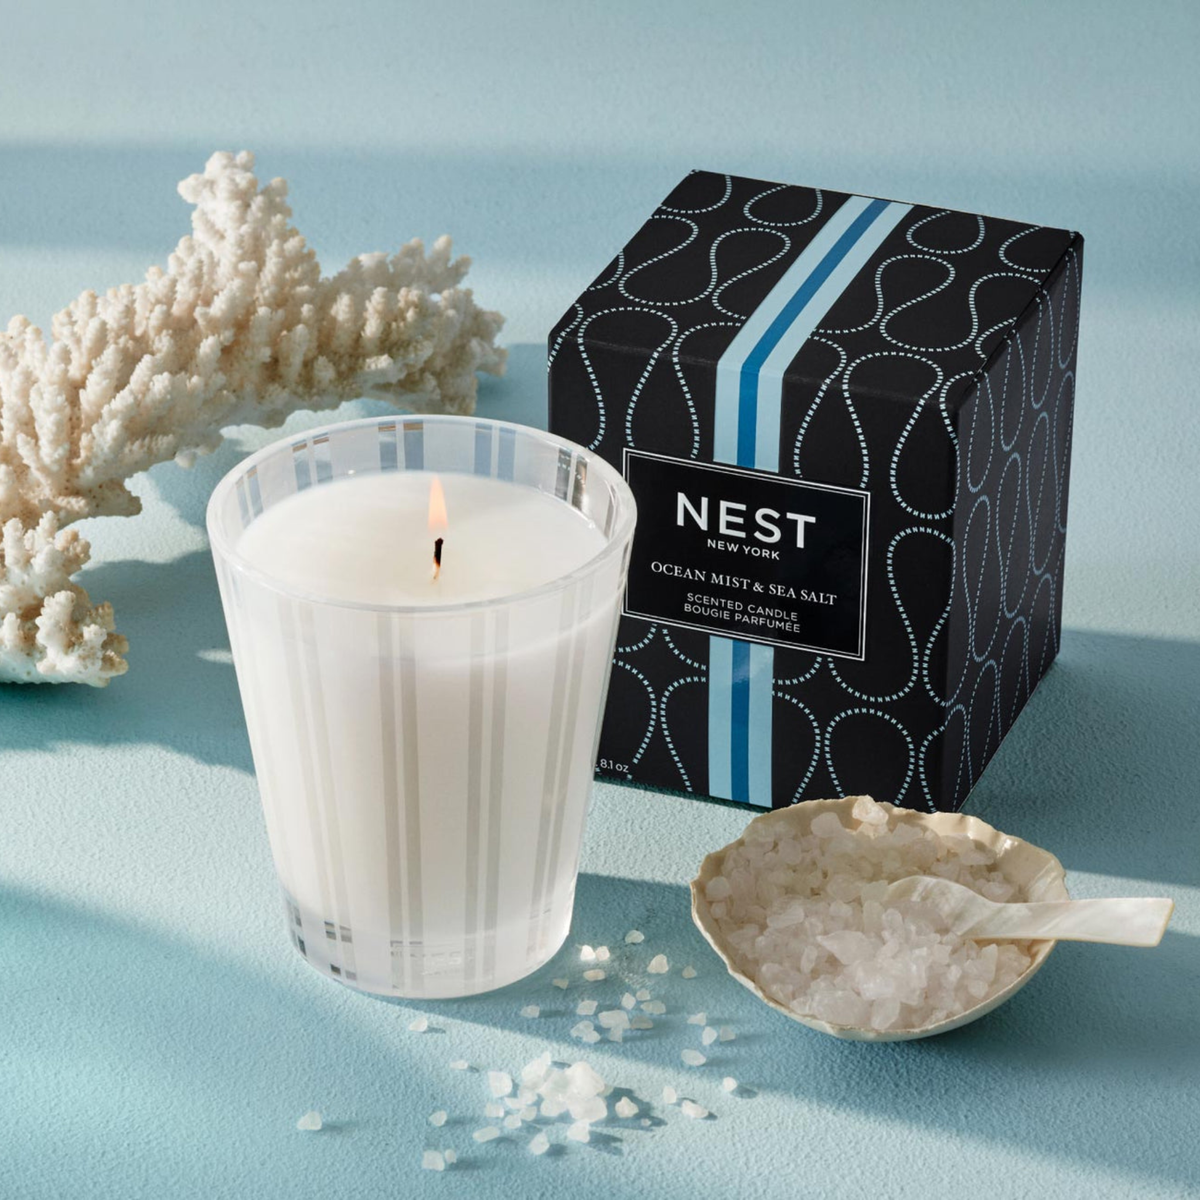 Lifestyle Photo of Nest New York Ocean Mist &amp; Sea Salt Classic Candle with Box